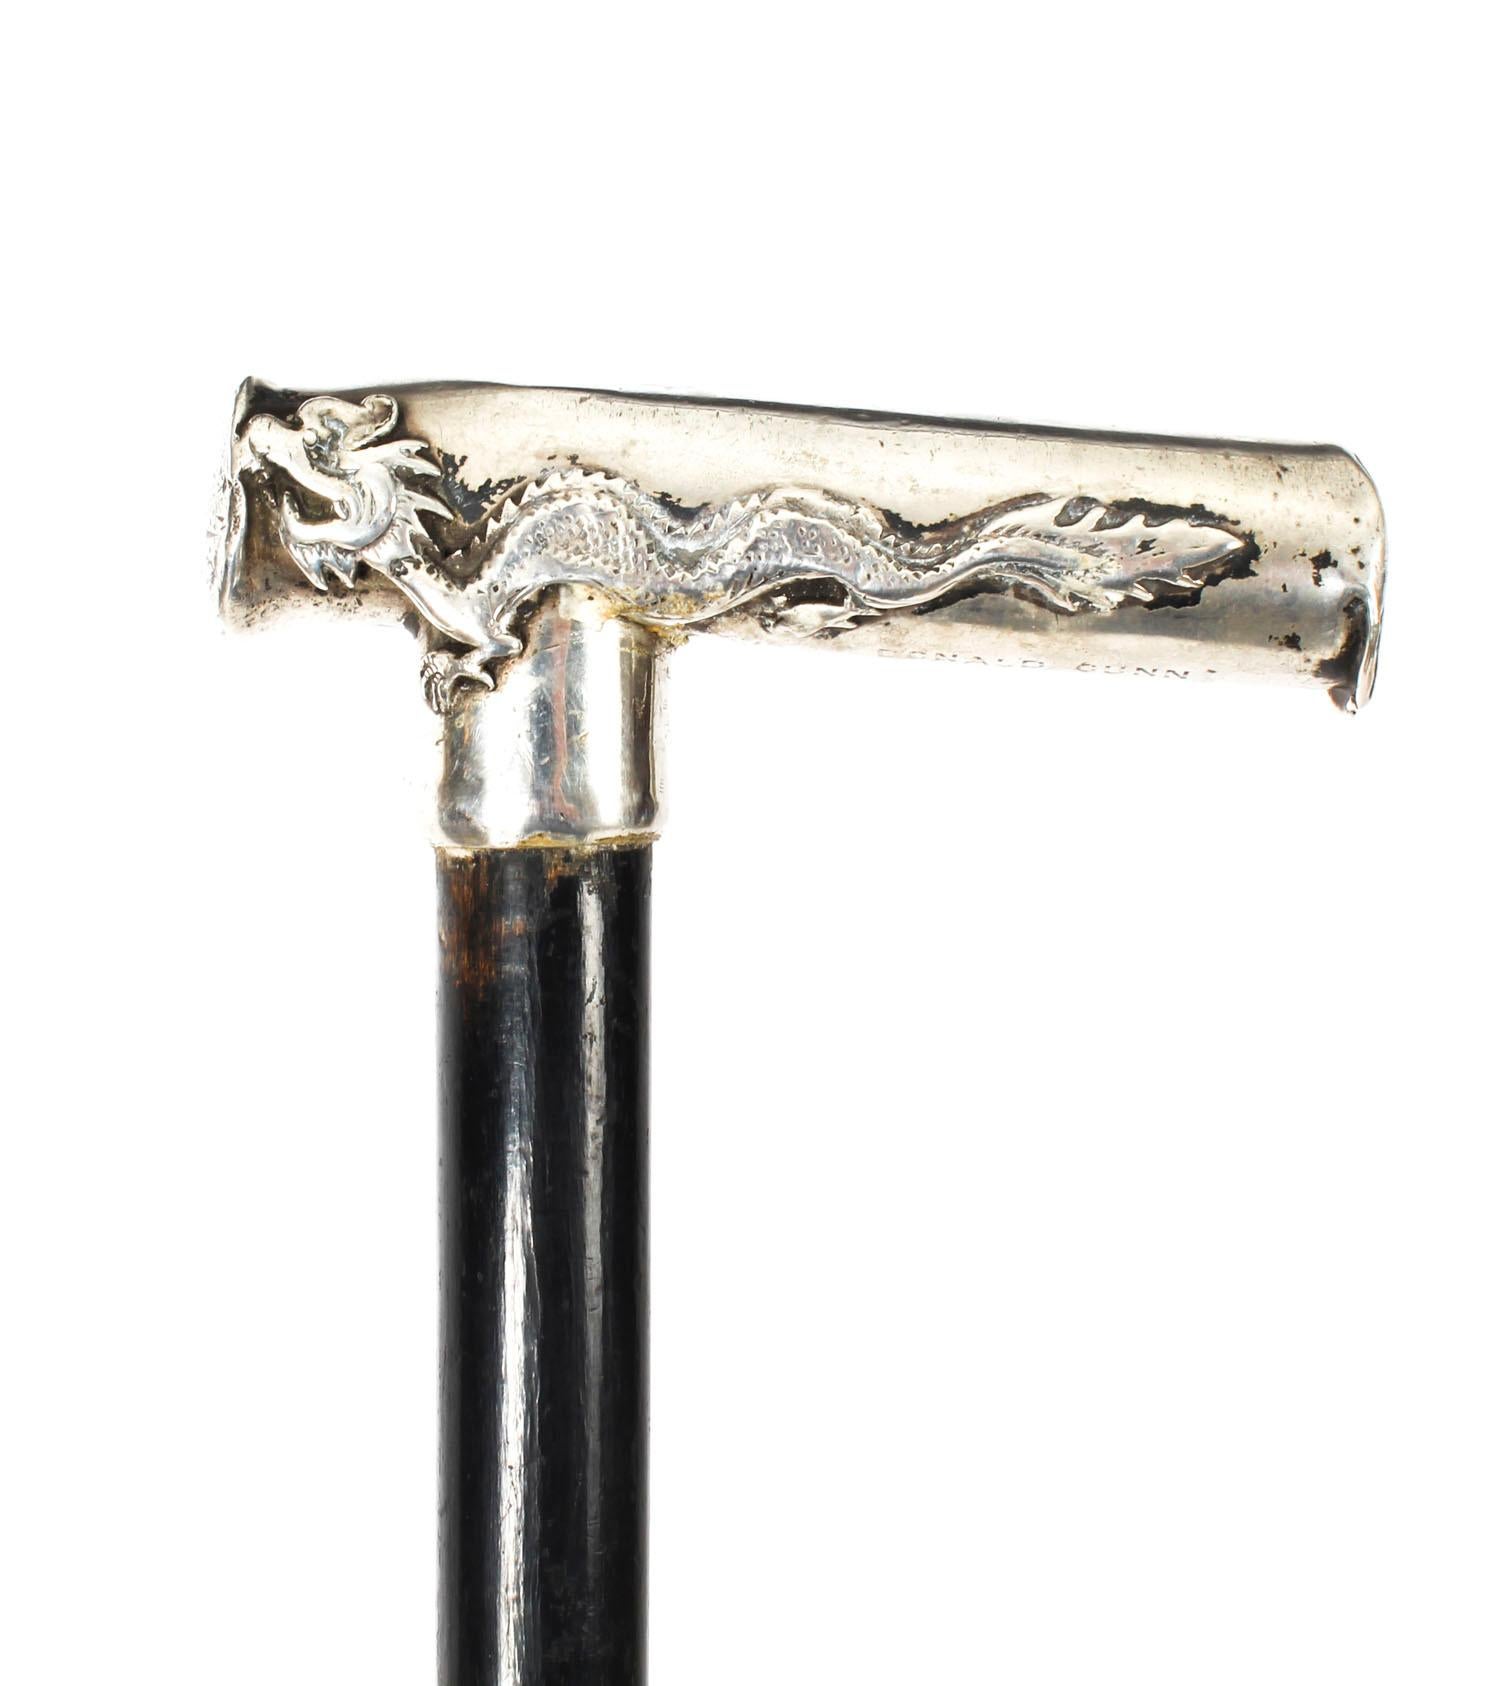 This beautiful antique Chinese silver mounted ebonized walking stick is circa 1880 in date.

It has an exquisite Chinese silver L-shaped handle decorated with a pair of dragons. The ebonized shaft is complete with its original bronze ferrule.
